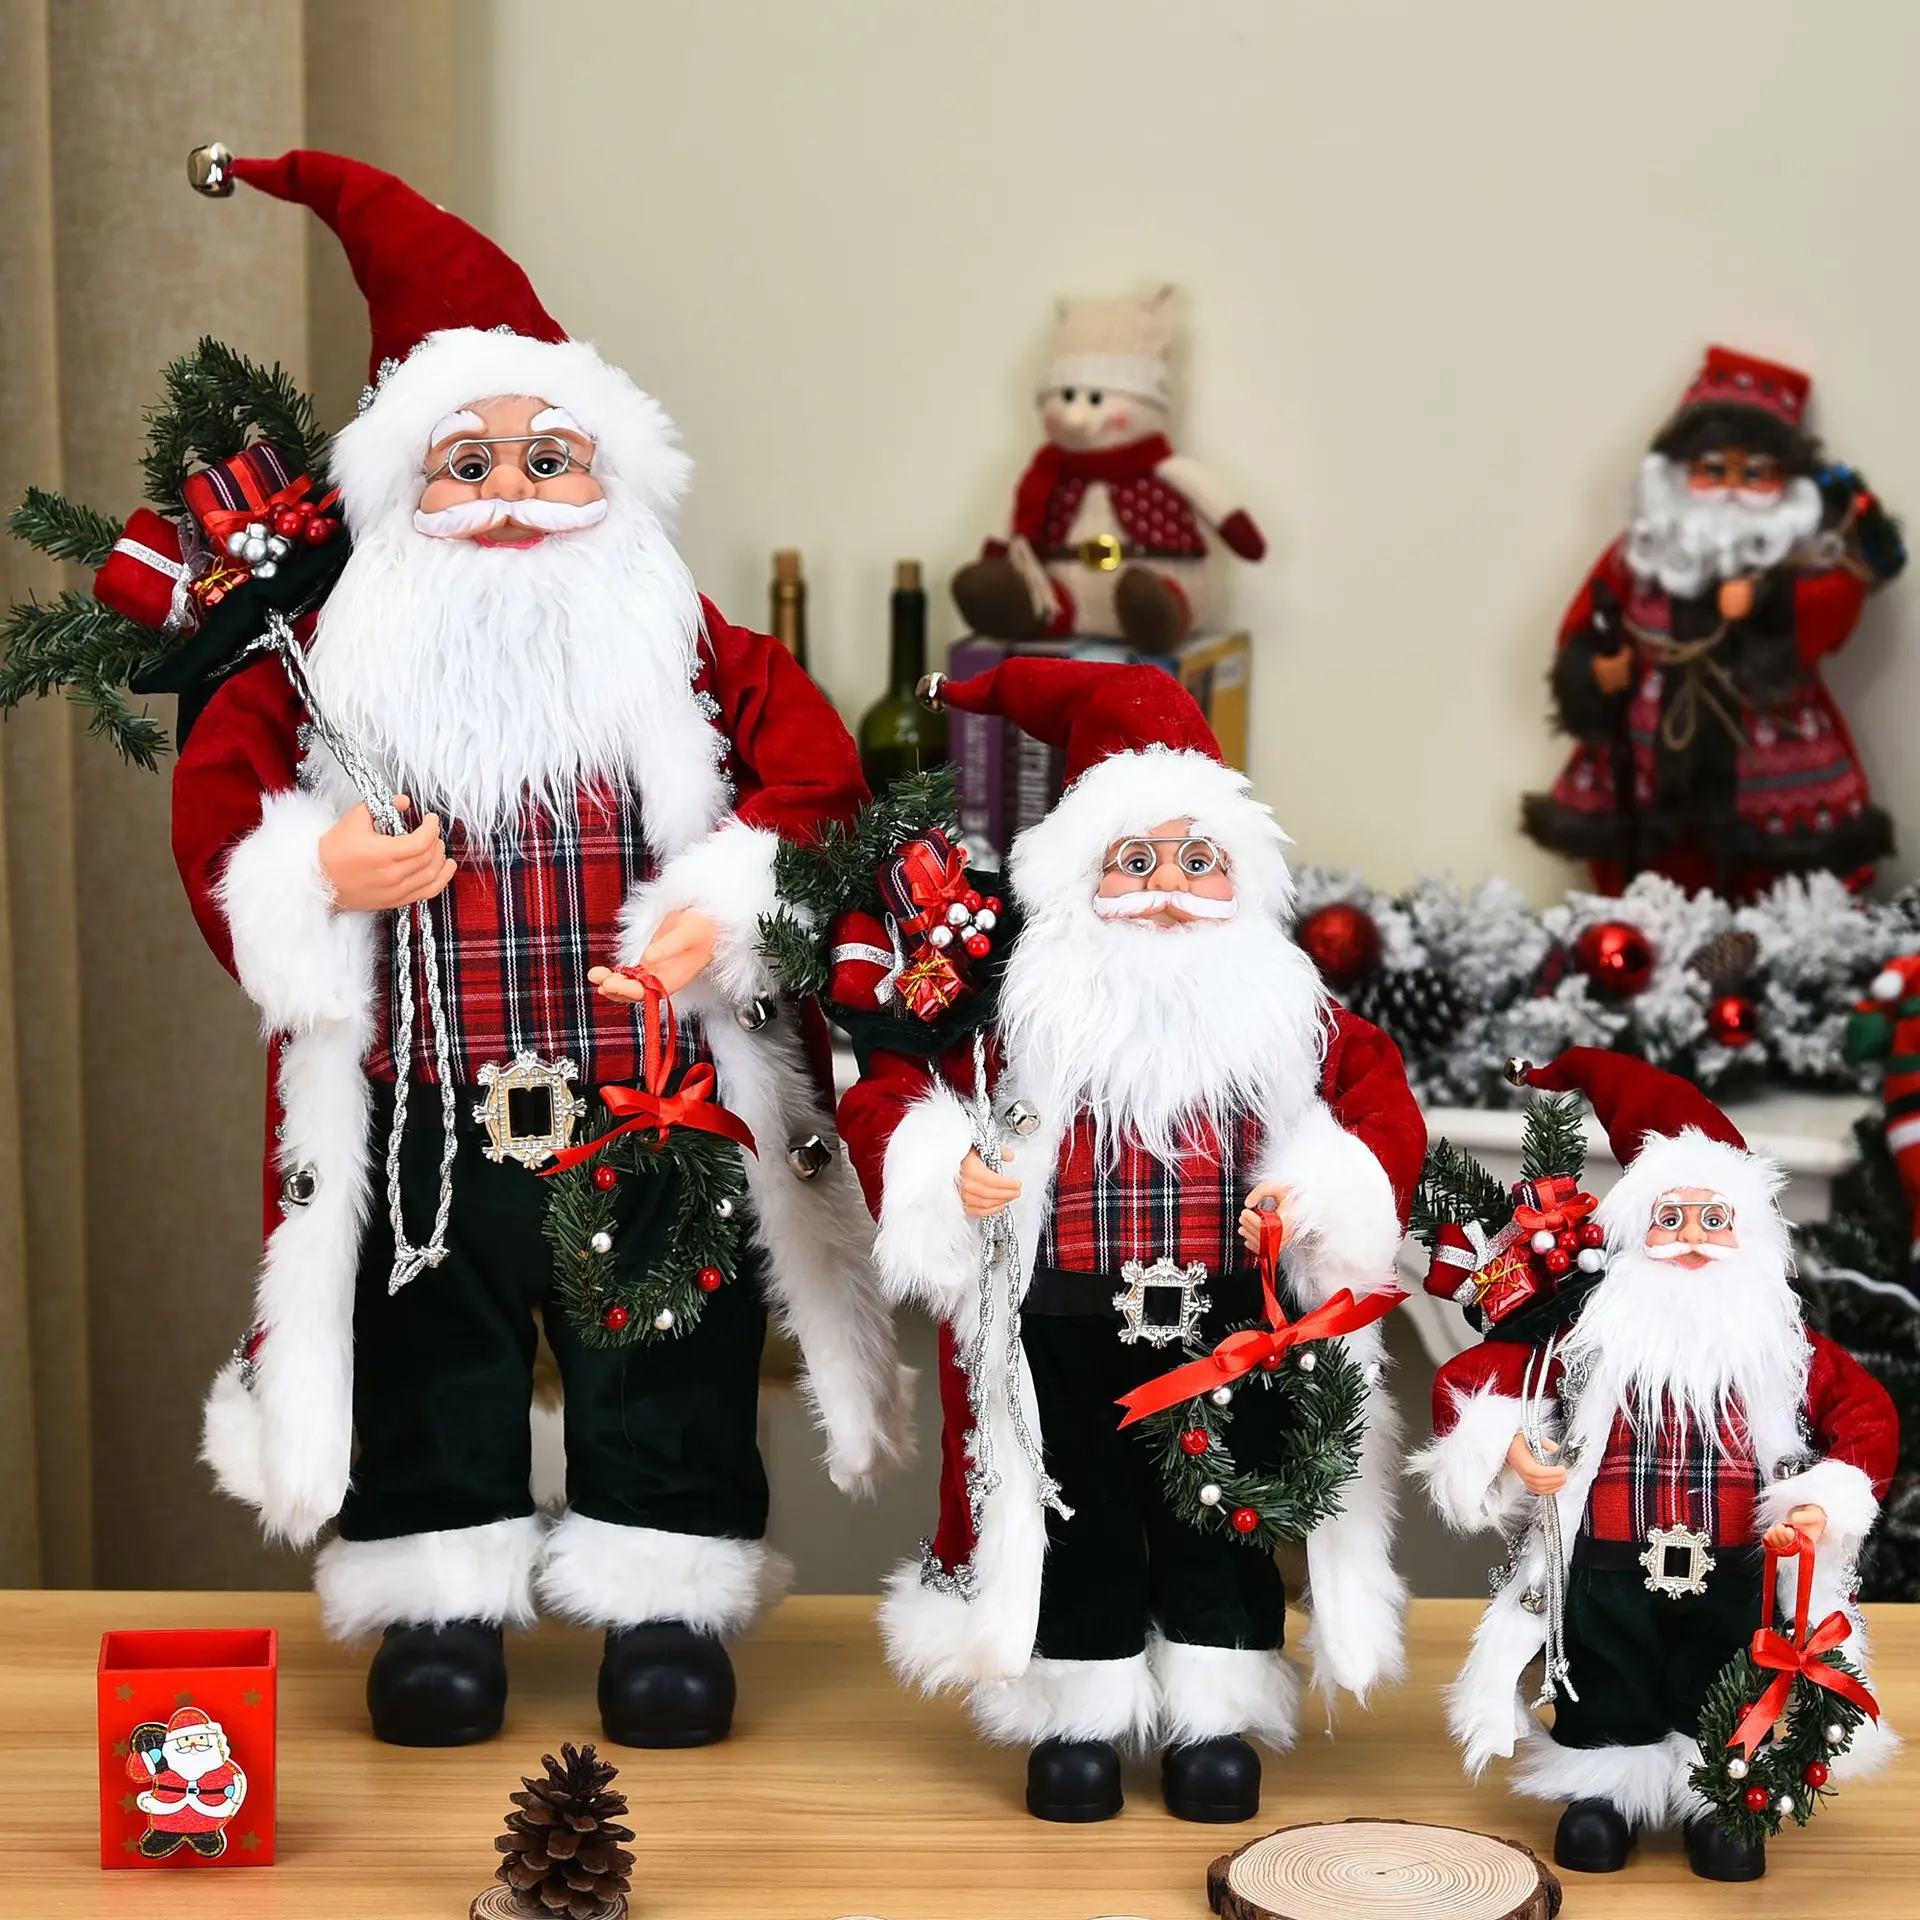 

New Santa Claus Doll Merry Christmas Elk Snowman Decorations for Home Children's New Year Toy Gift Decor Party Supplies 30/40cm